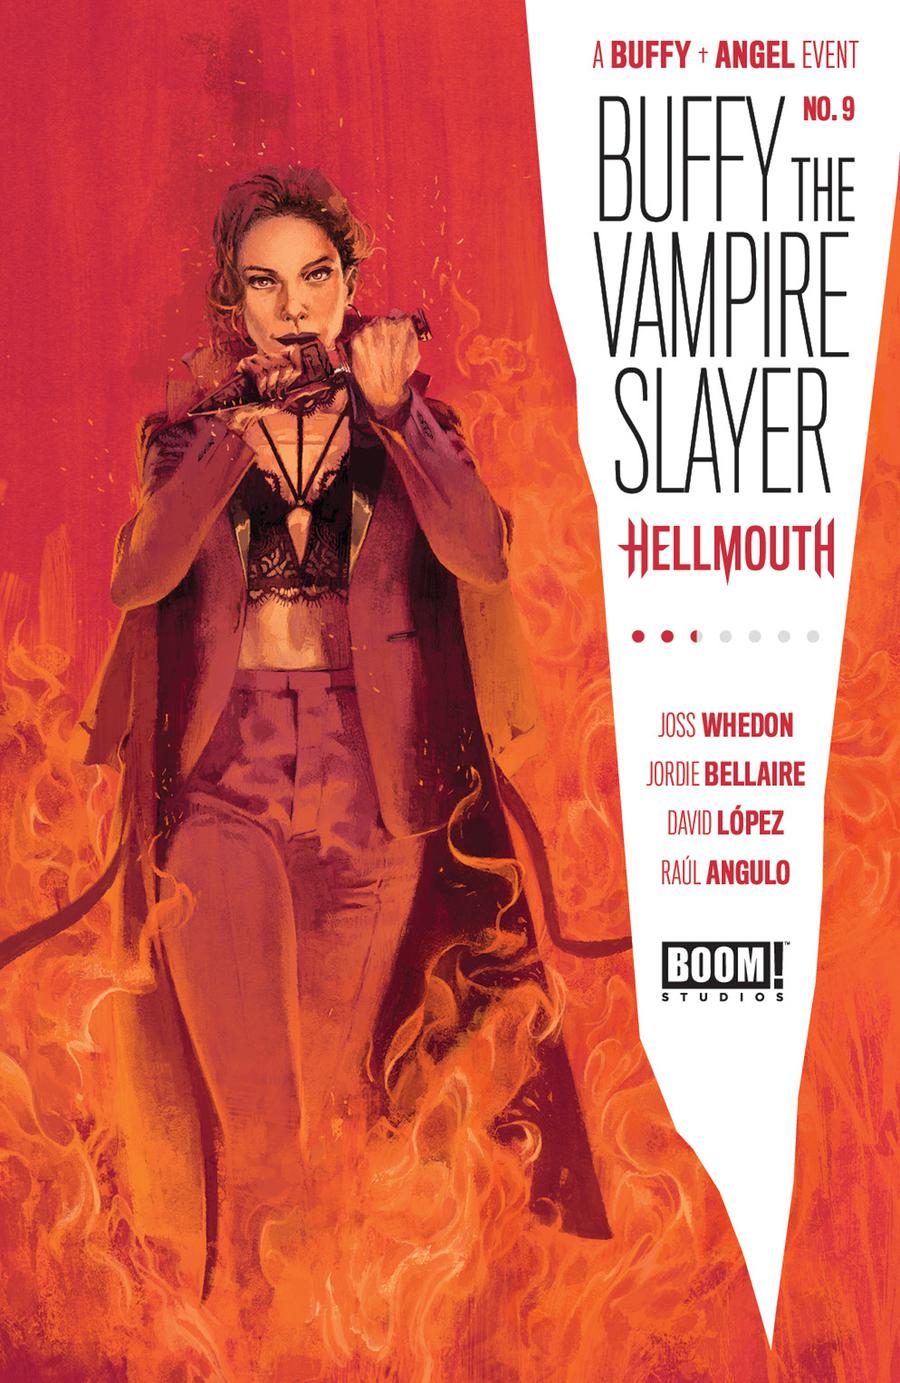 Buffy The Vampire Slayer Vol 2 #9 Cover A Main Regular Marc Aspinall Cover (Hellmouth Tie-In)